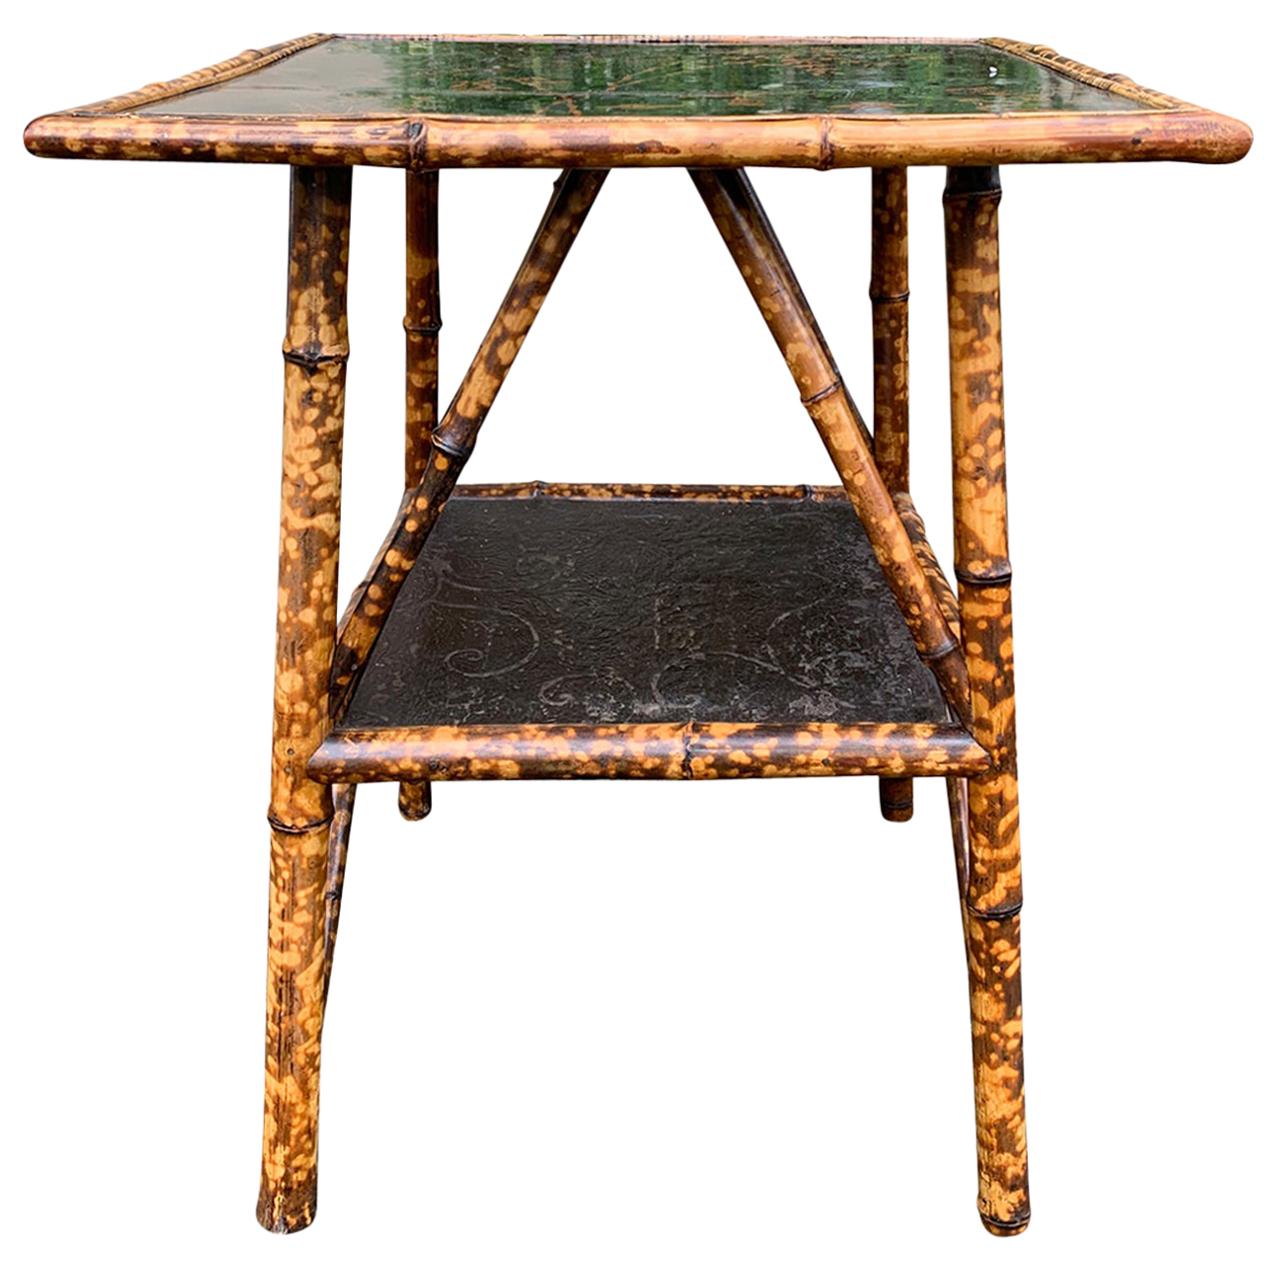 Late 19th-Early 20th Century English Bamboo and Lacquered Chinoiserie Side Table